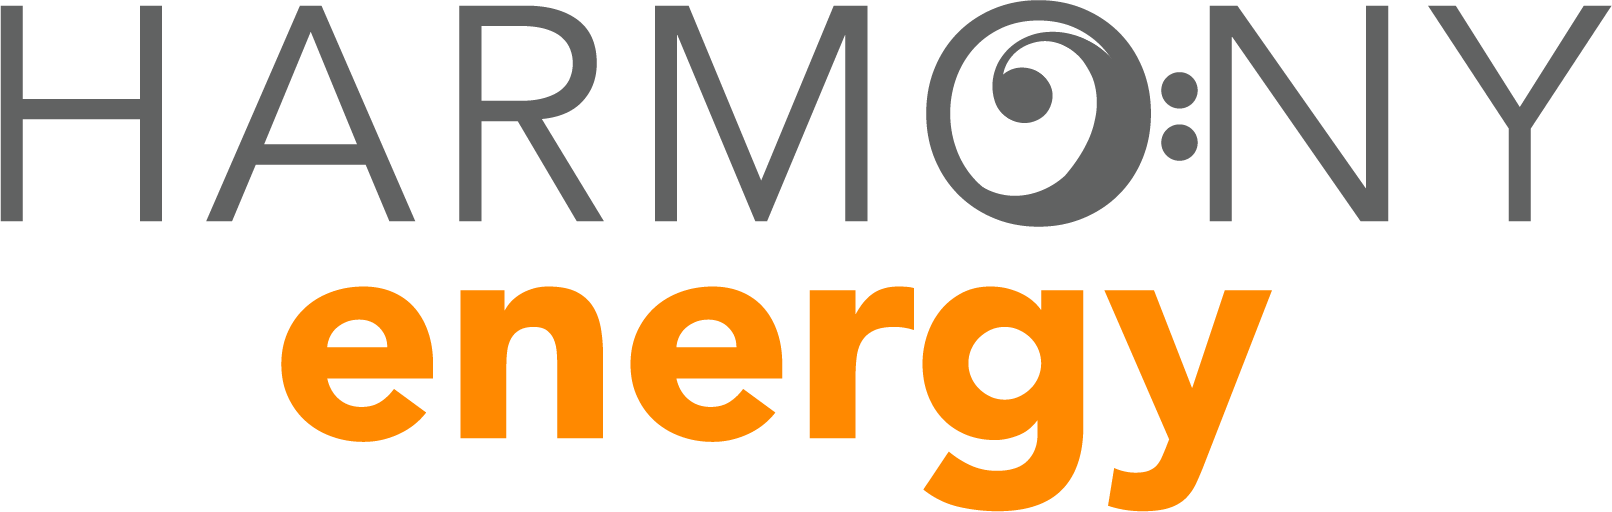 Harmony Energy - Creating Energy Independence for Long Island Homeowners